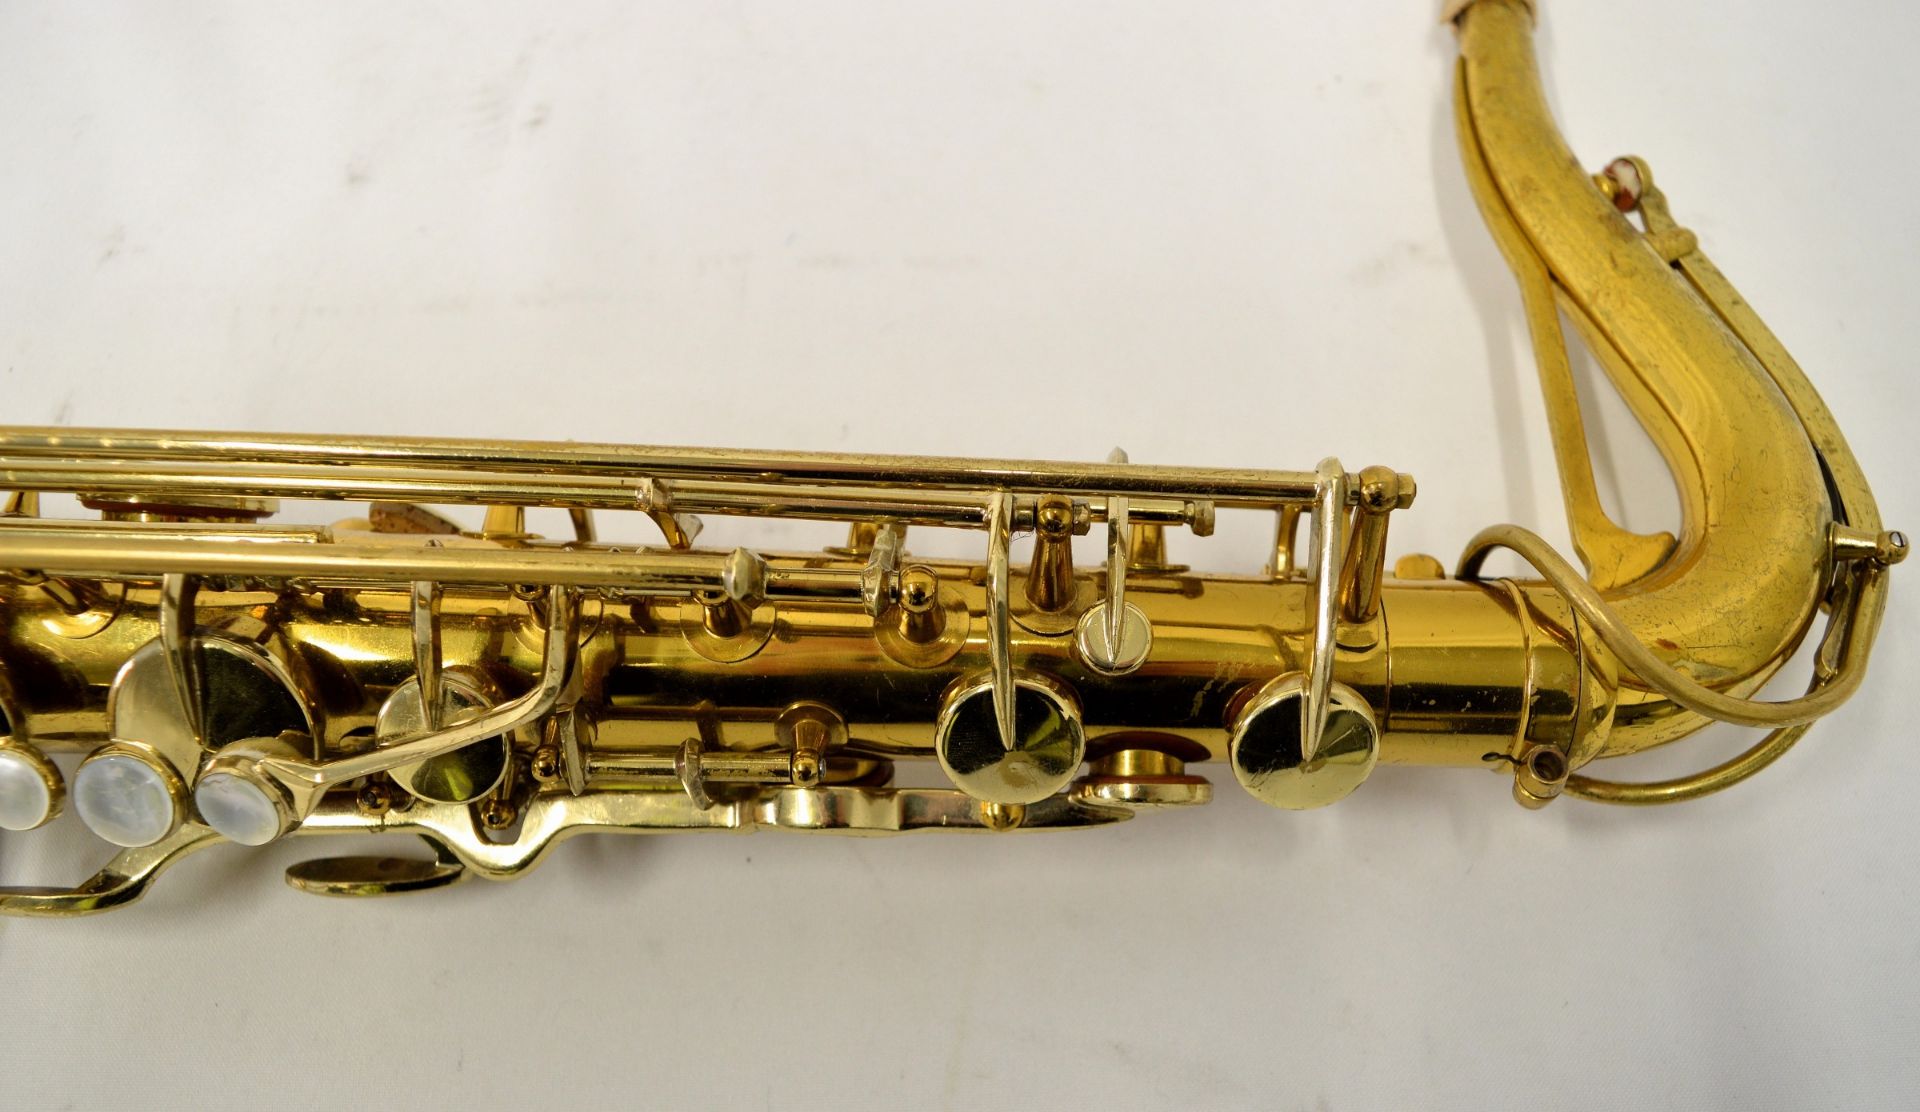 King Model 2416 Saxophone with Case. Serial No. 871174. - Image 8 of 23